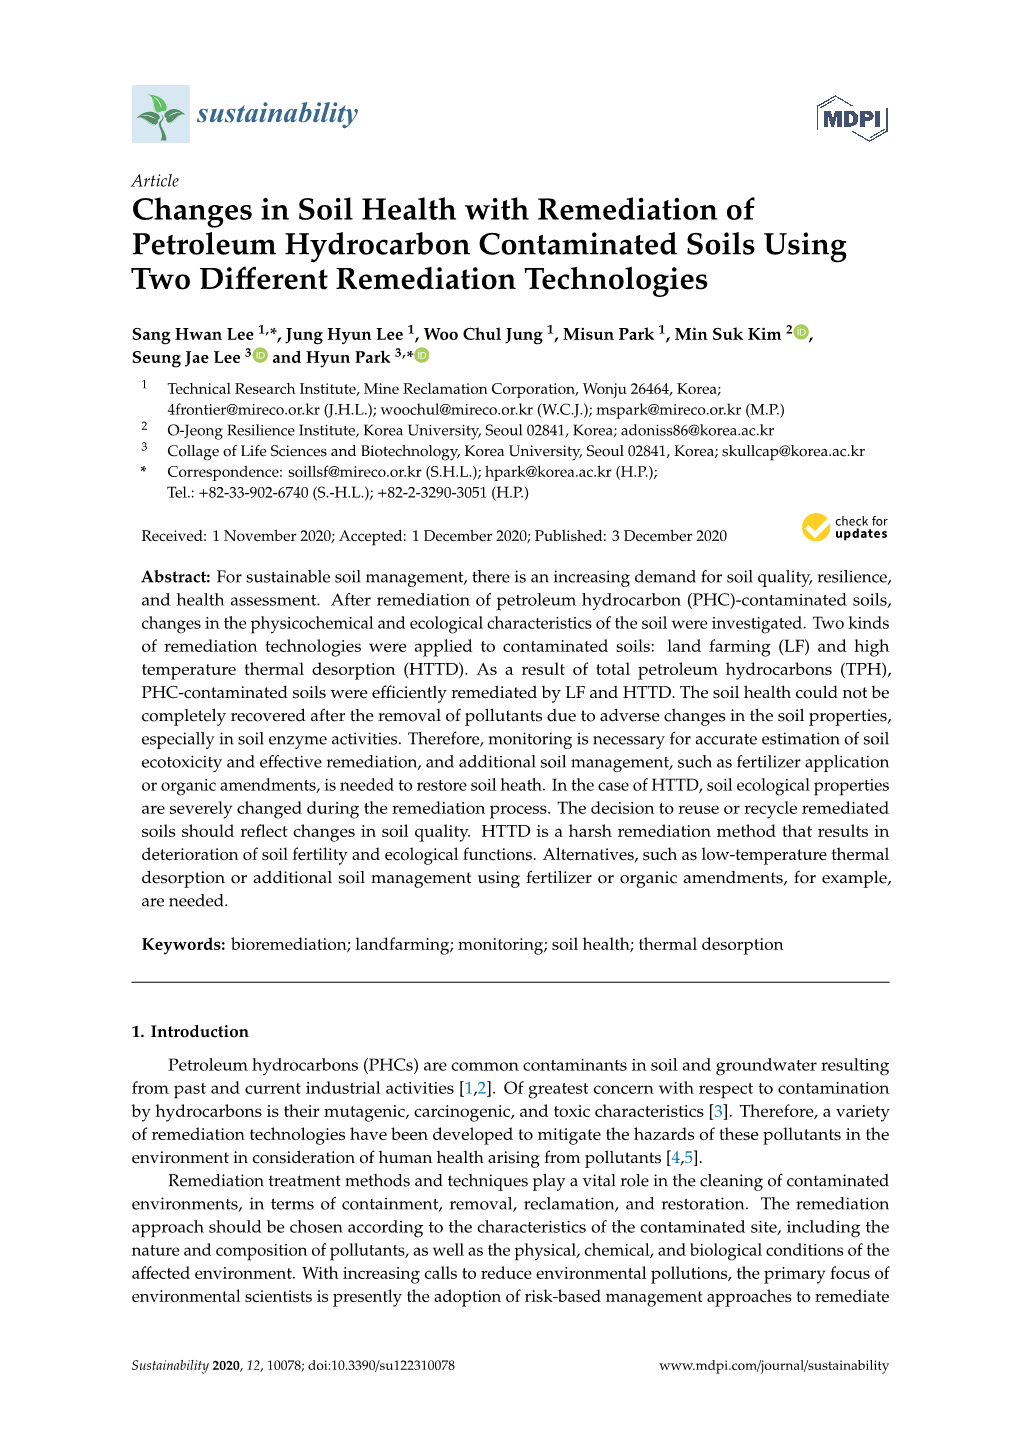 Changes in Soil Health with Remediation of Petroleum Hydrocarbon Contaminated Soils Using Two Diﬀerent Remediation Technologies